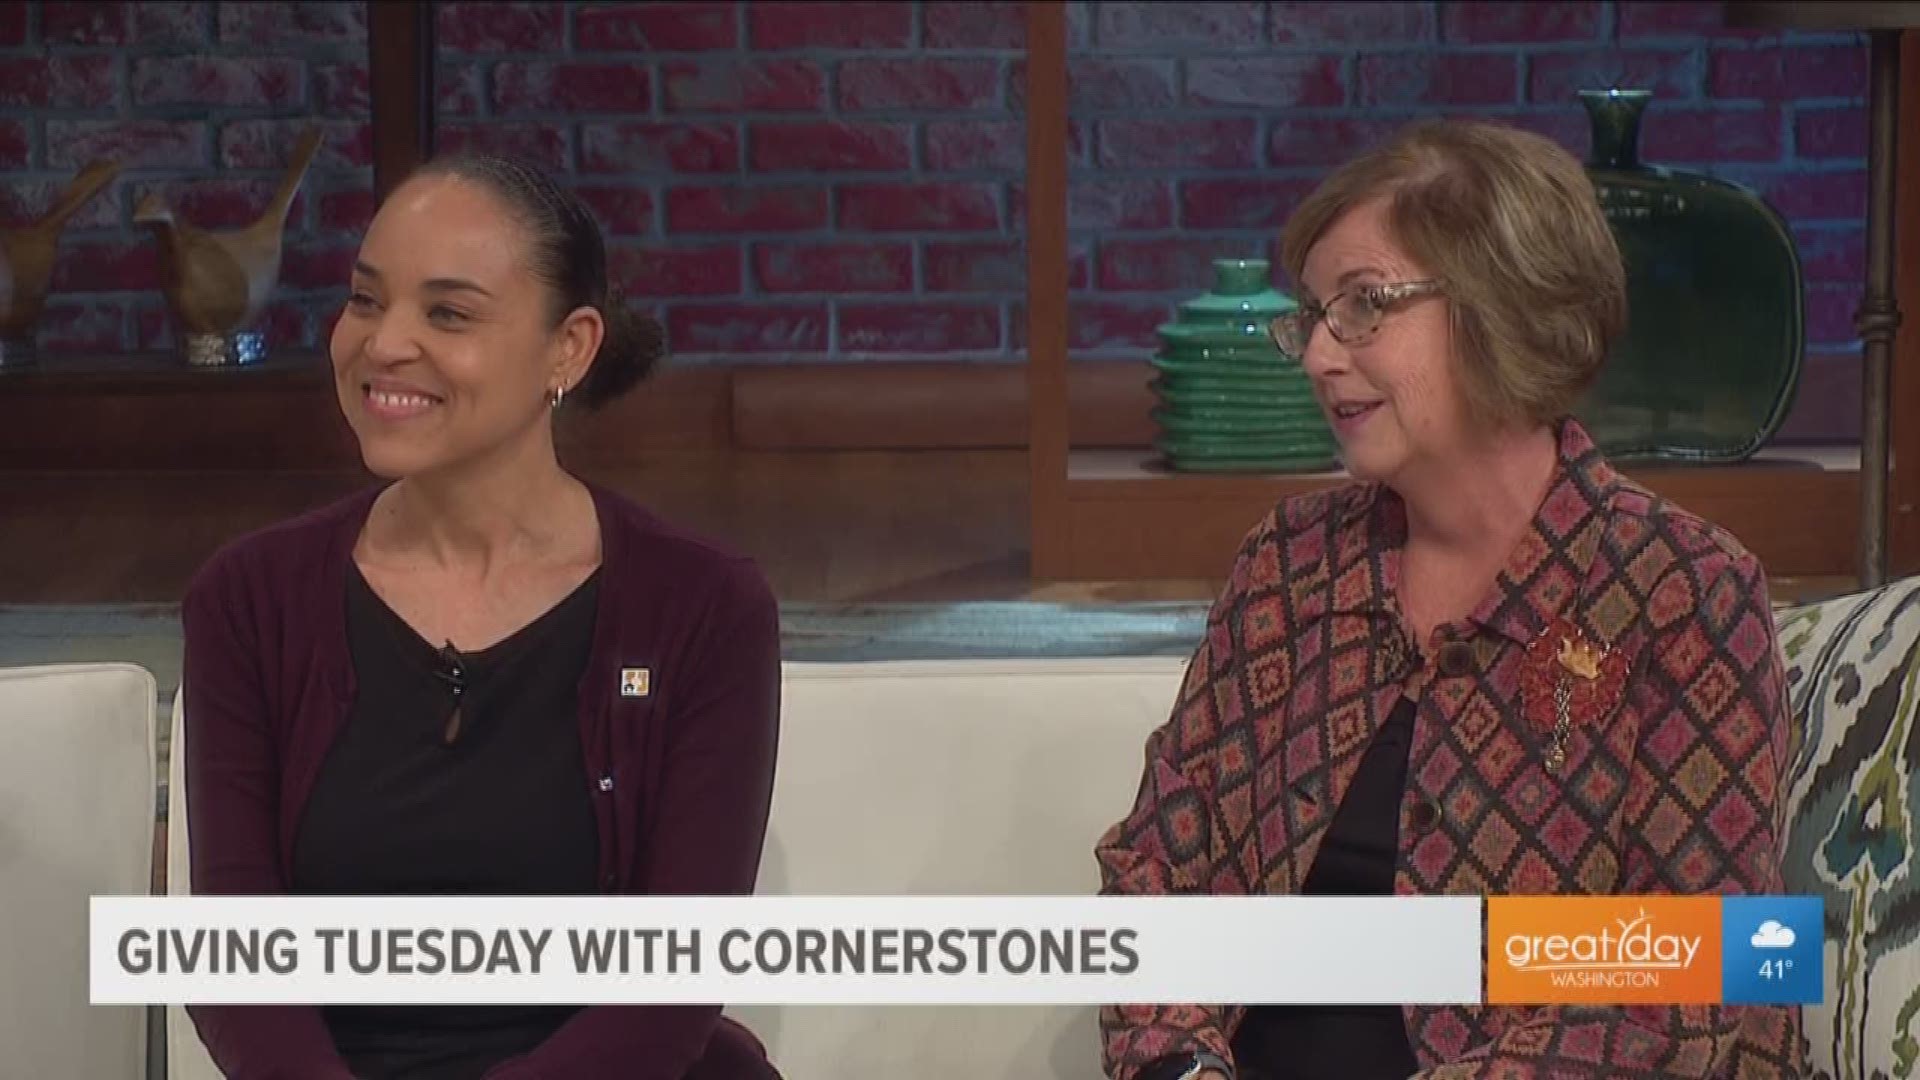 Maura Williams and Kerrie Wilson of Cornerstones explain how you can get involved with the Northern Virginia non-profit this Giving Tuesday.